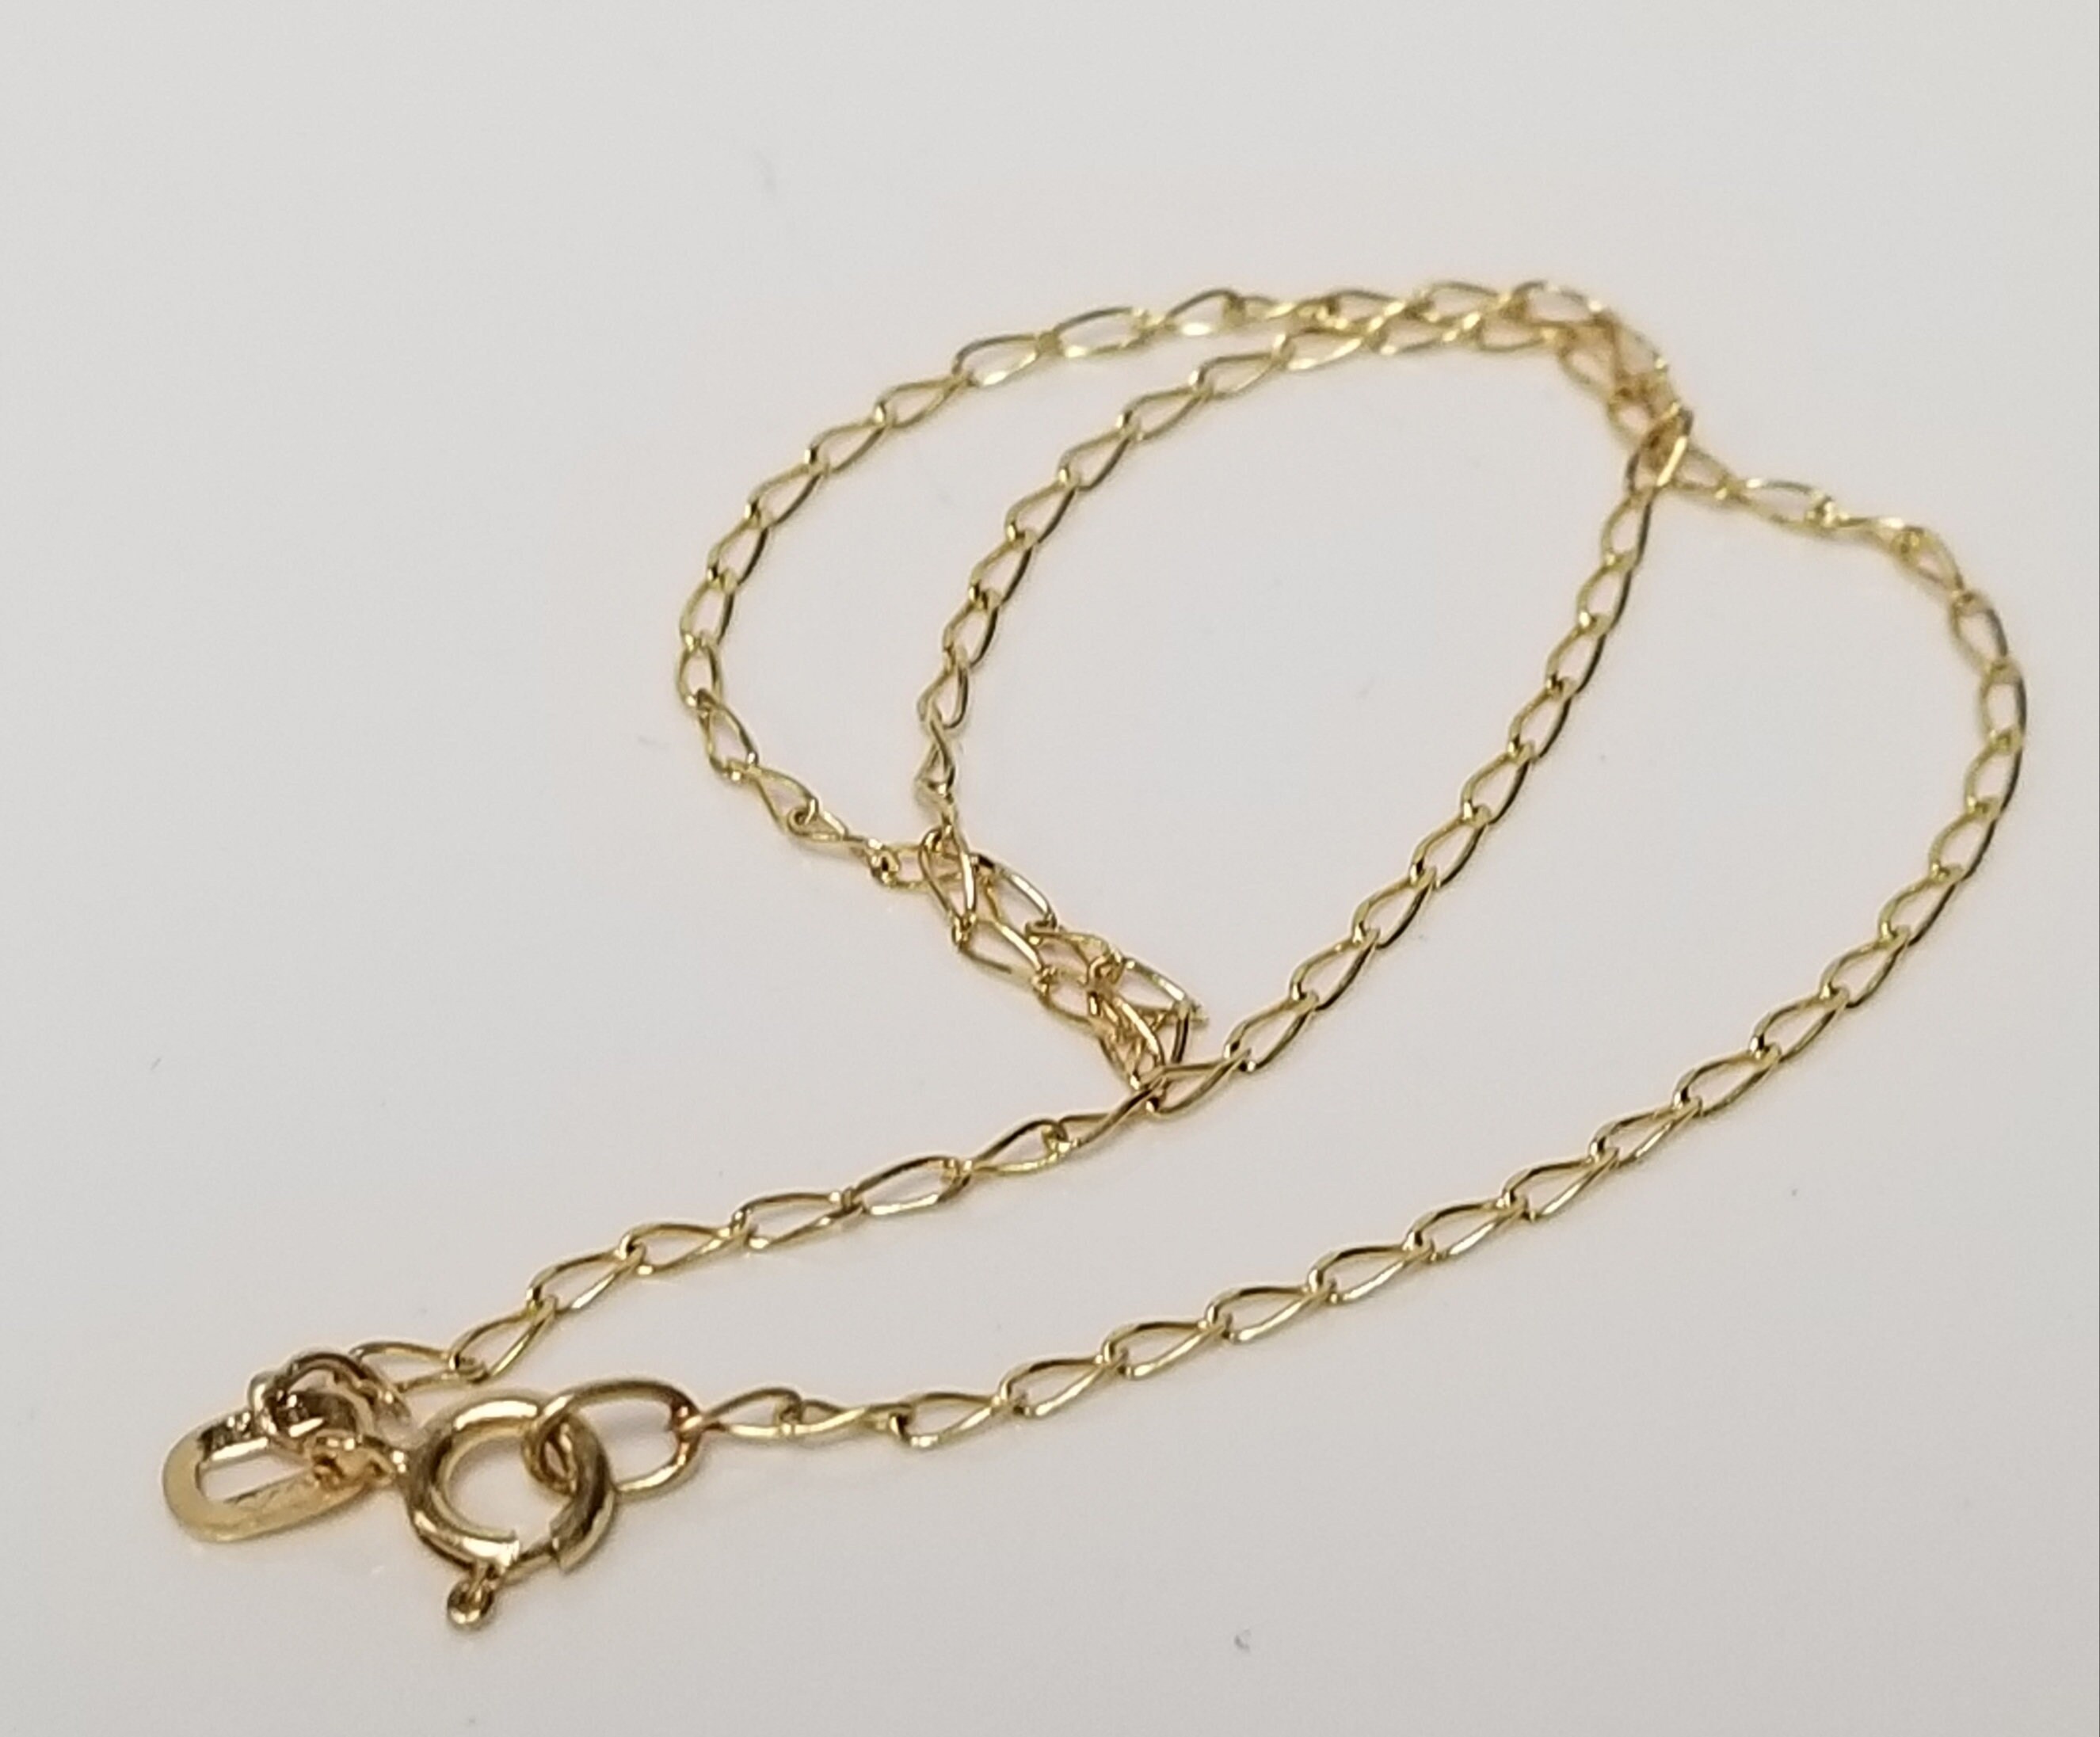 Fine Jewelry Chain, Bulk, Stainless Steel Chain, Grade 316, Soldered Closed  Links, 5 to 20 Feet, 2x2x0.5mm, 1913 